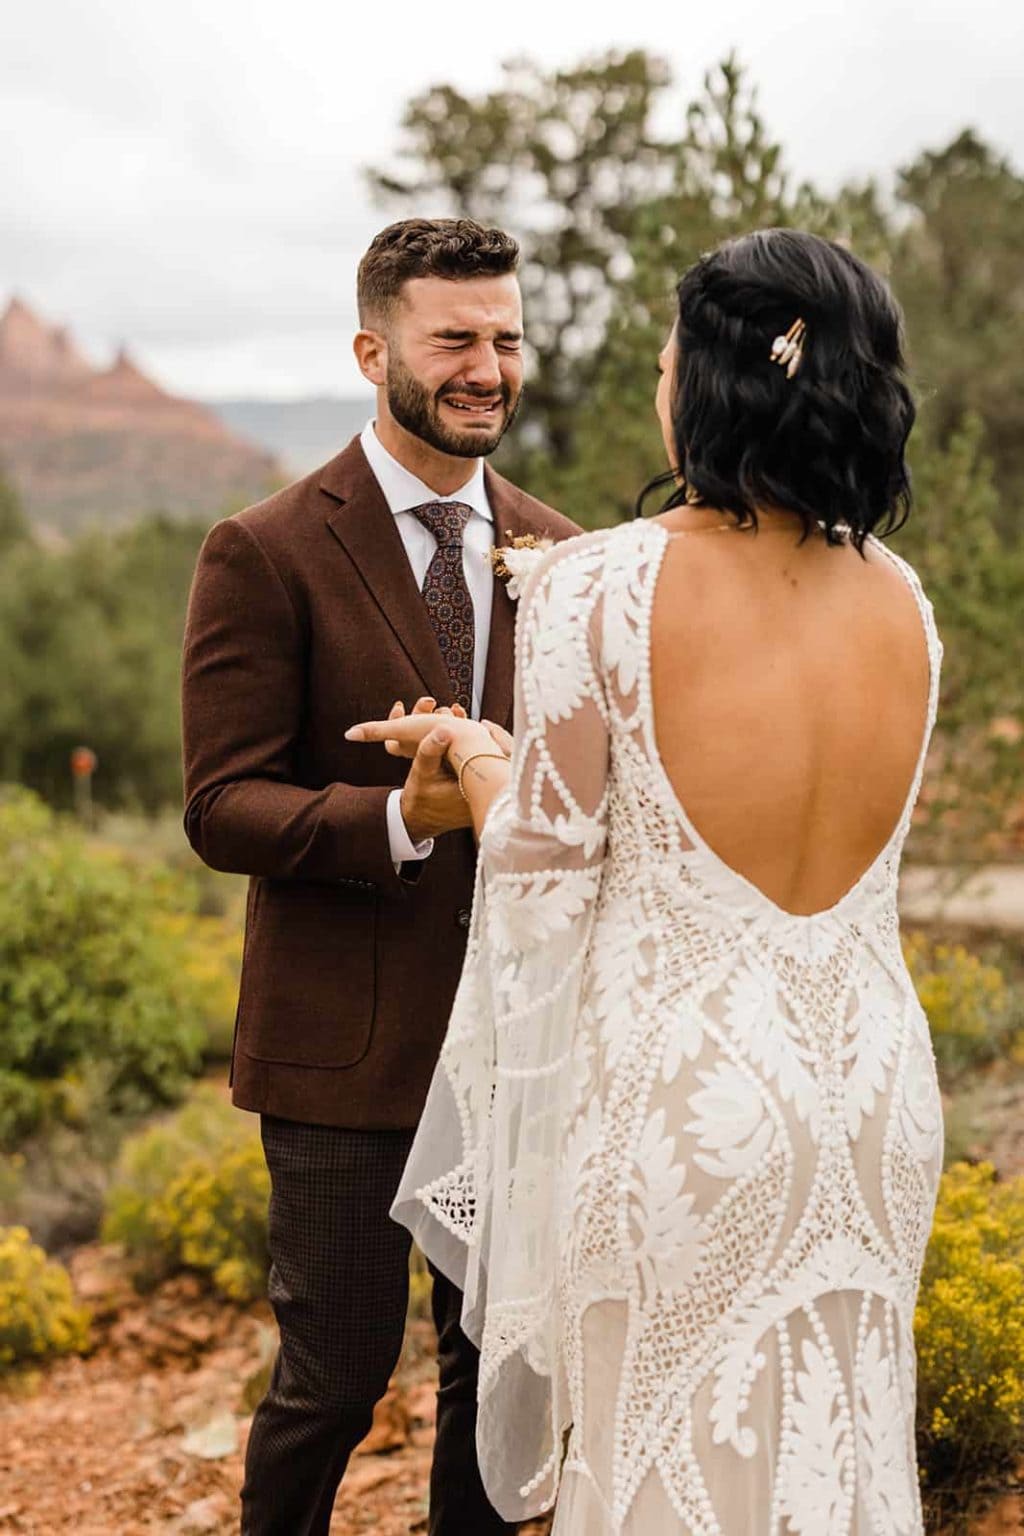 A bride and groom celebrating their first look in Sedona